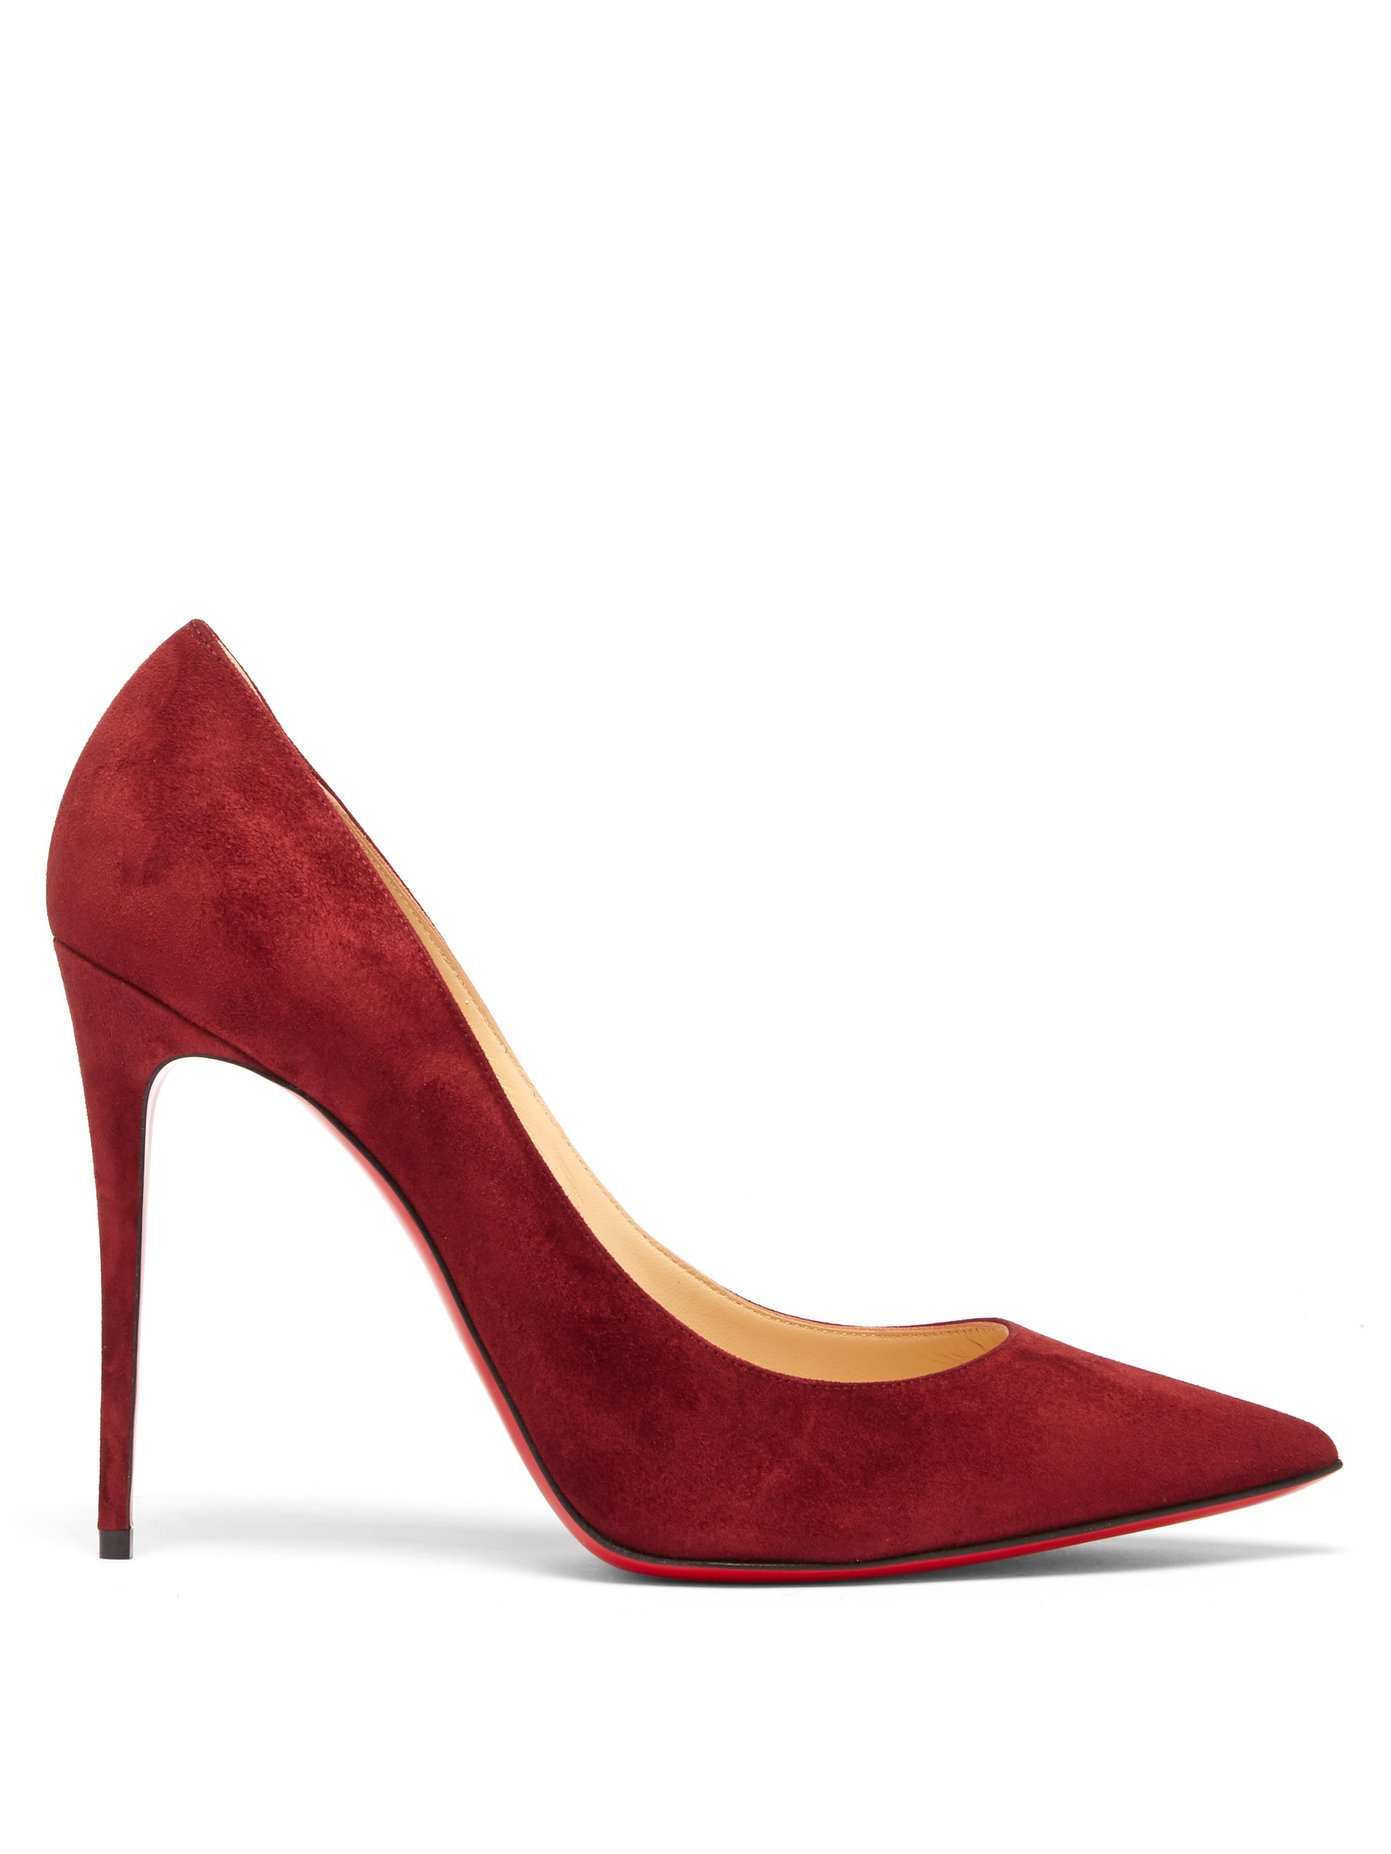 Christian Louboutin Kate 100 Pumps In Red | ModeSens